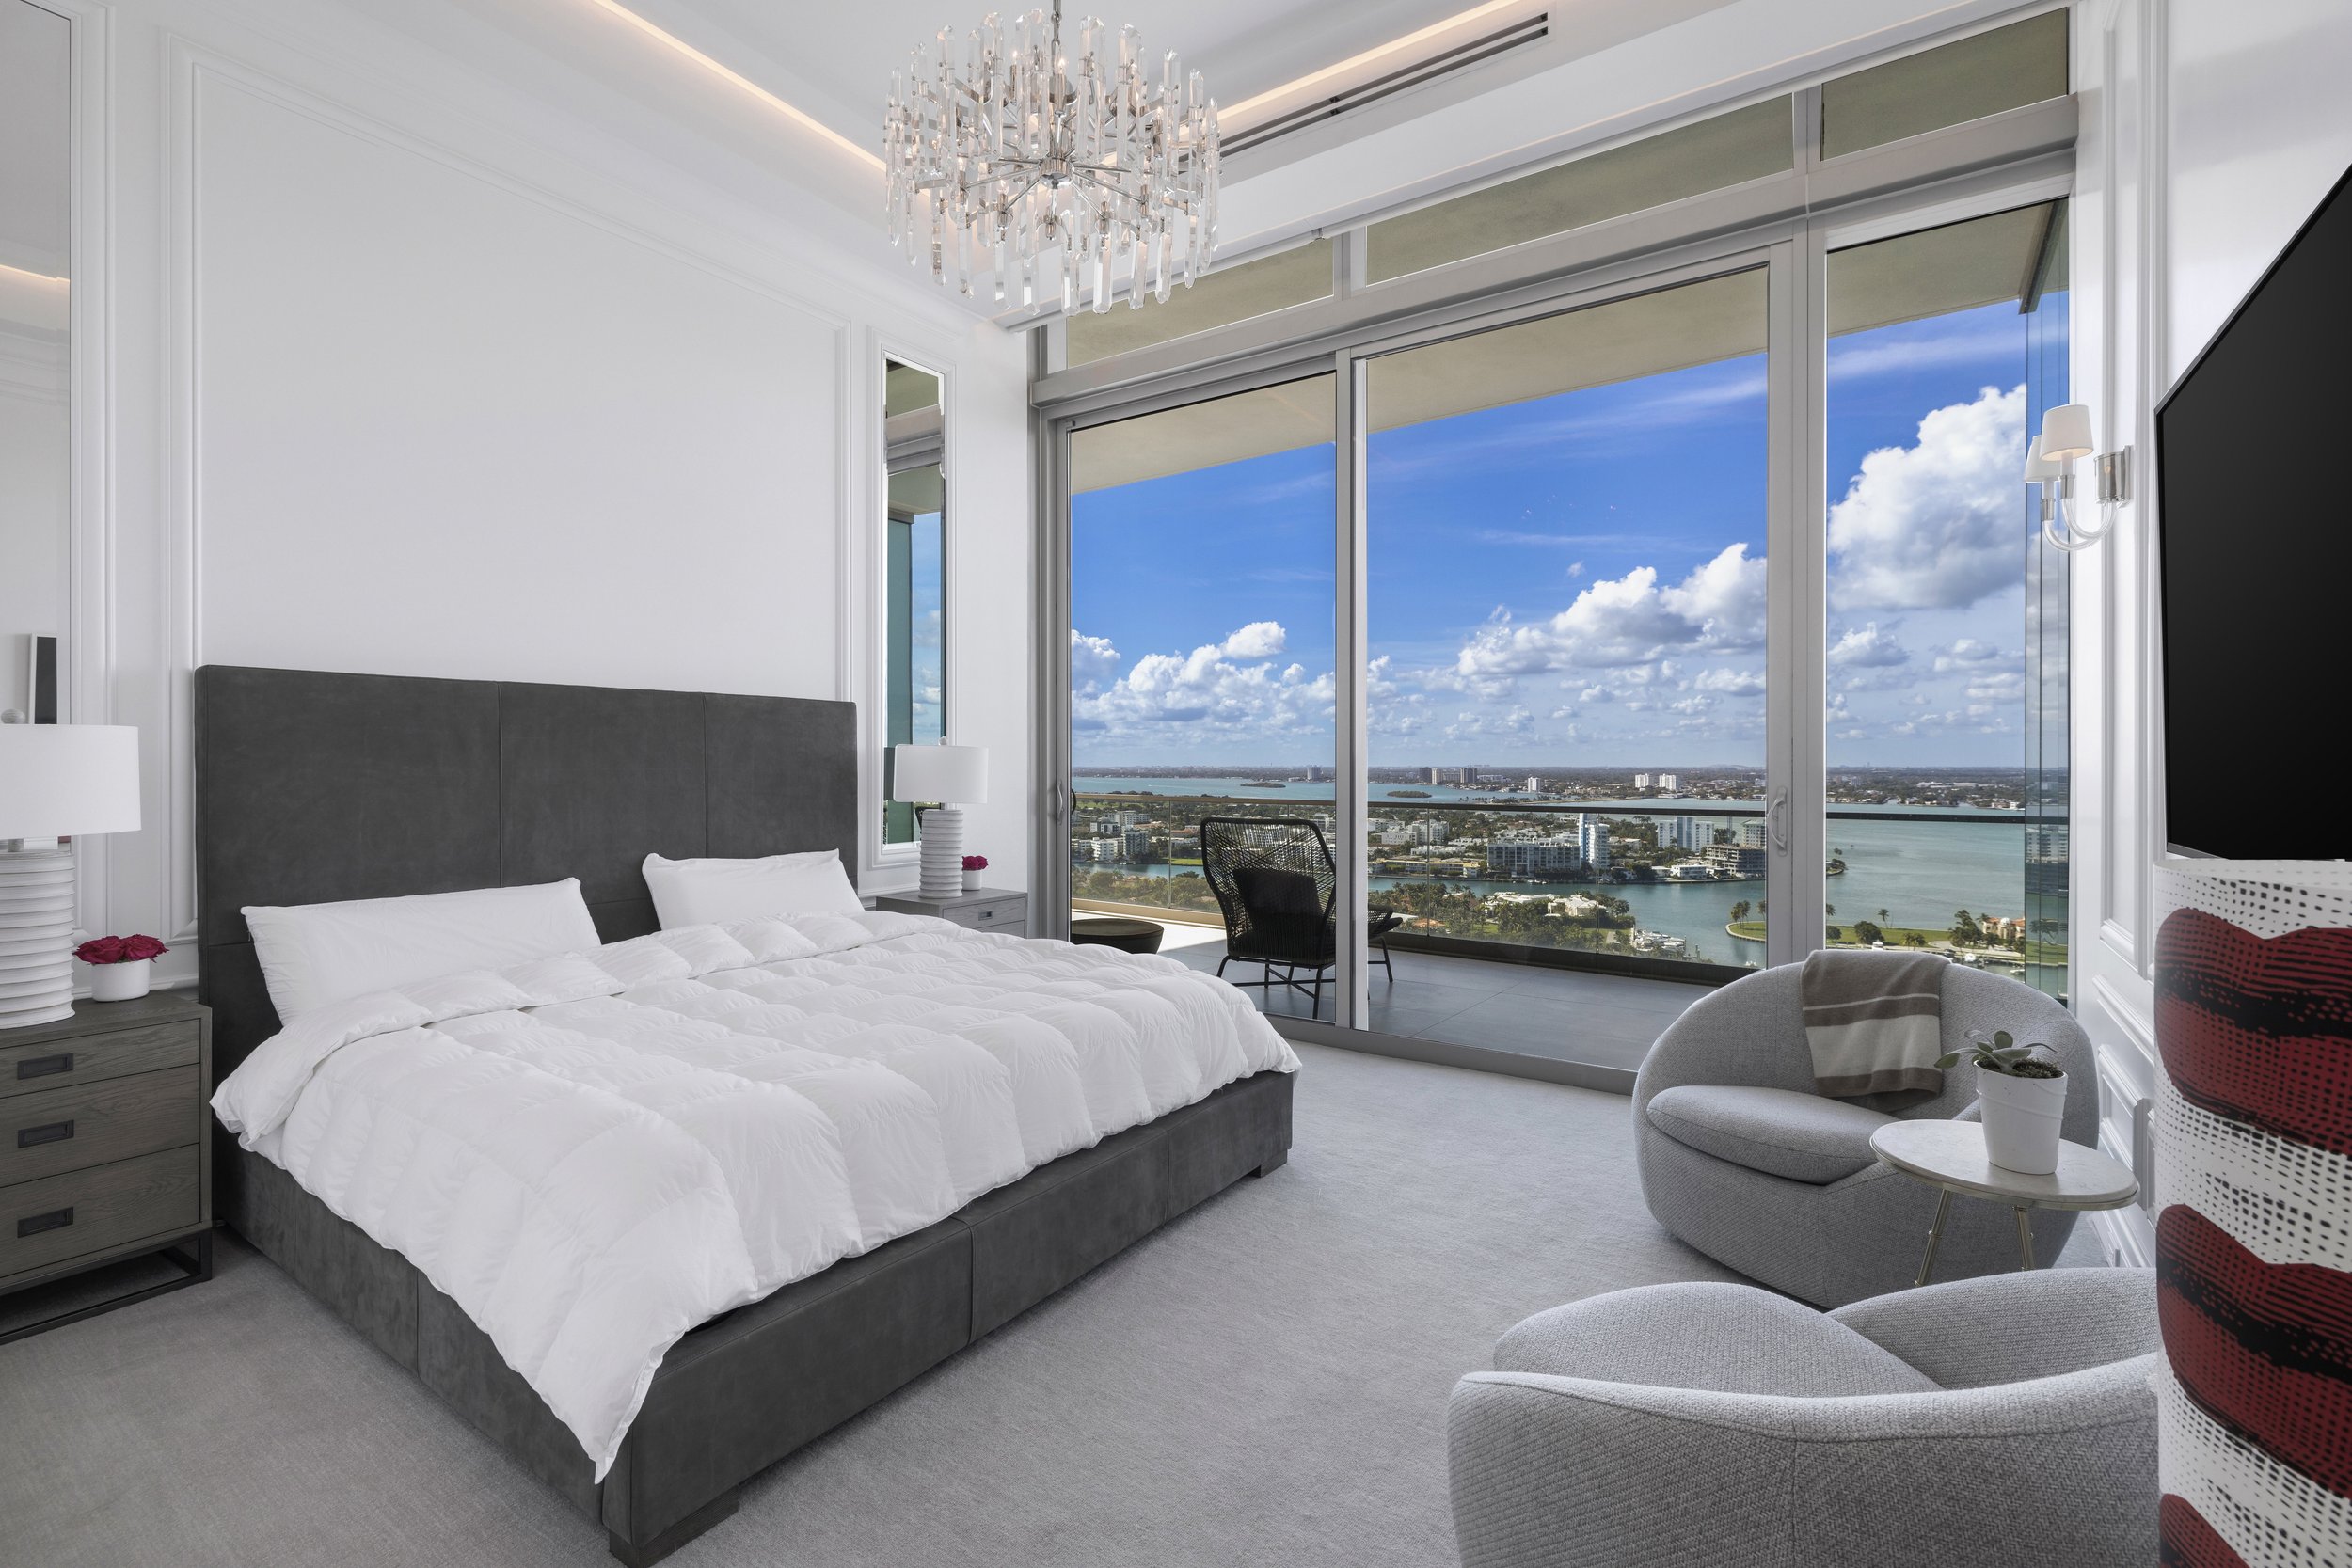 Step Inside This Two-Story Crown Jewel Penthouse At Oceana Bal Harbour Asking $25 Million 211.jpg